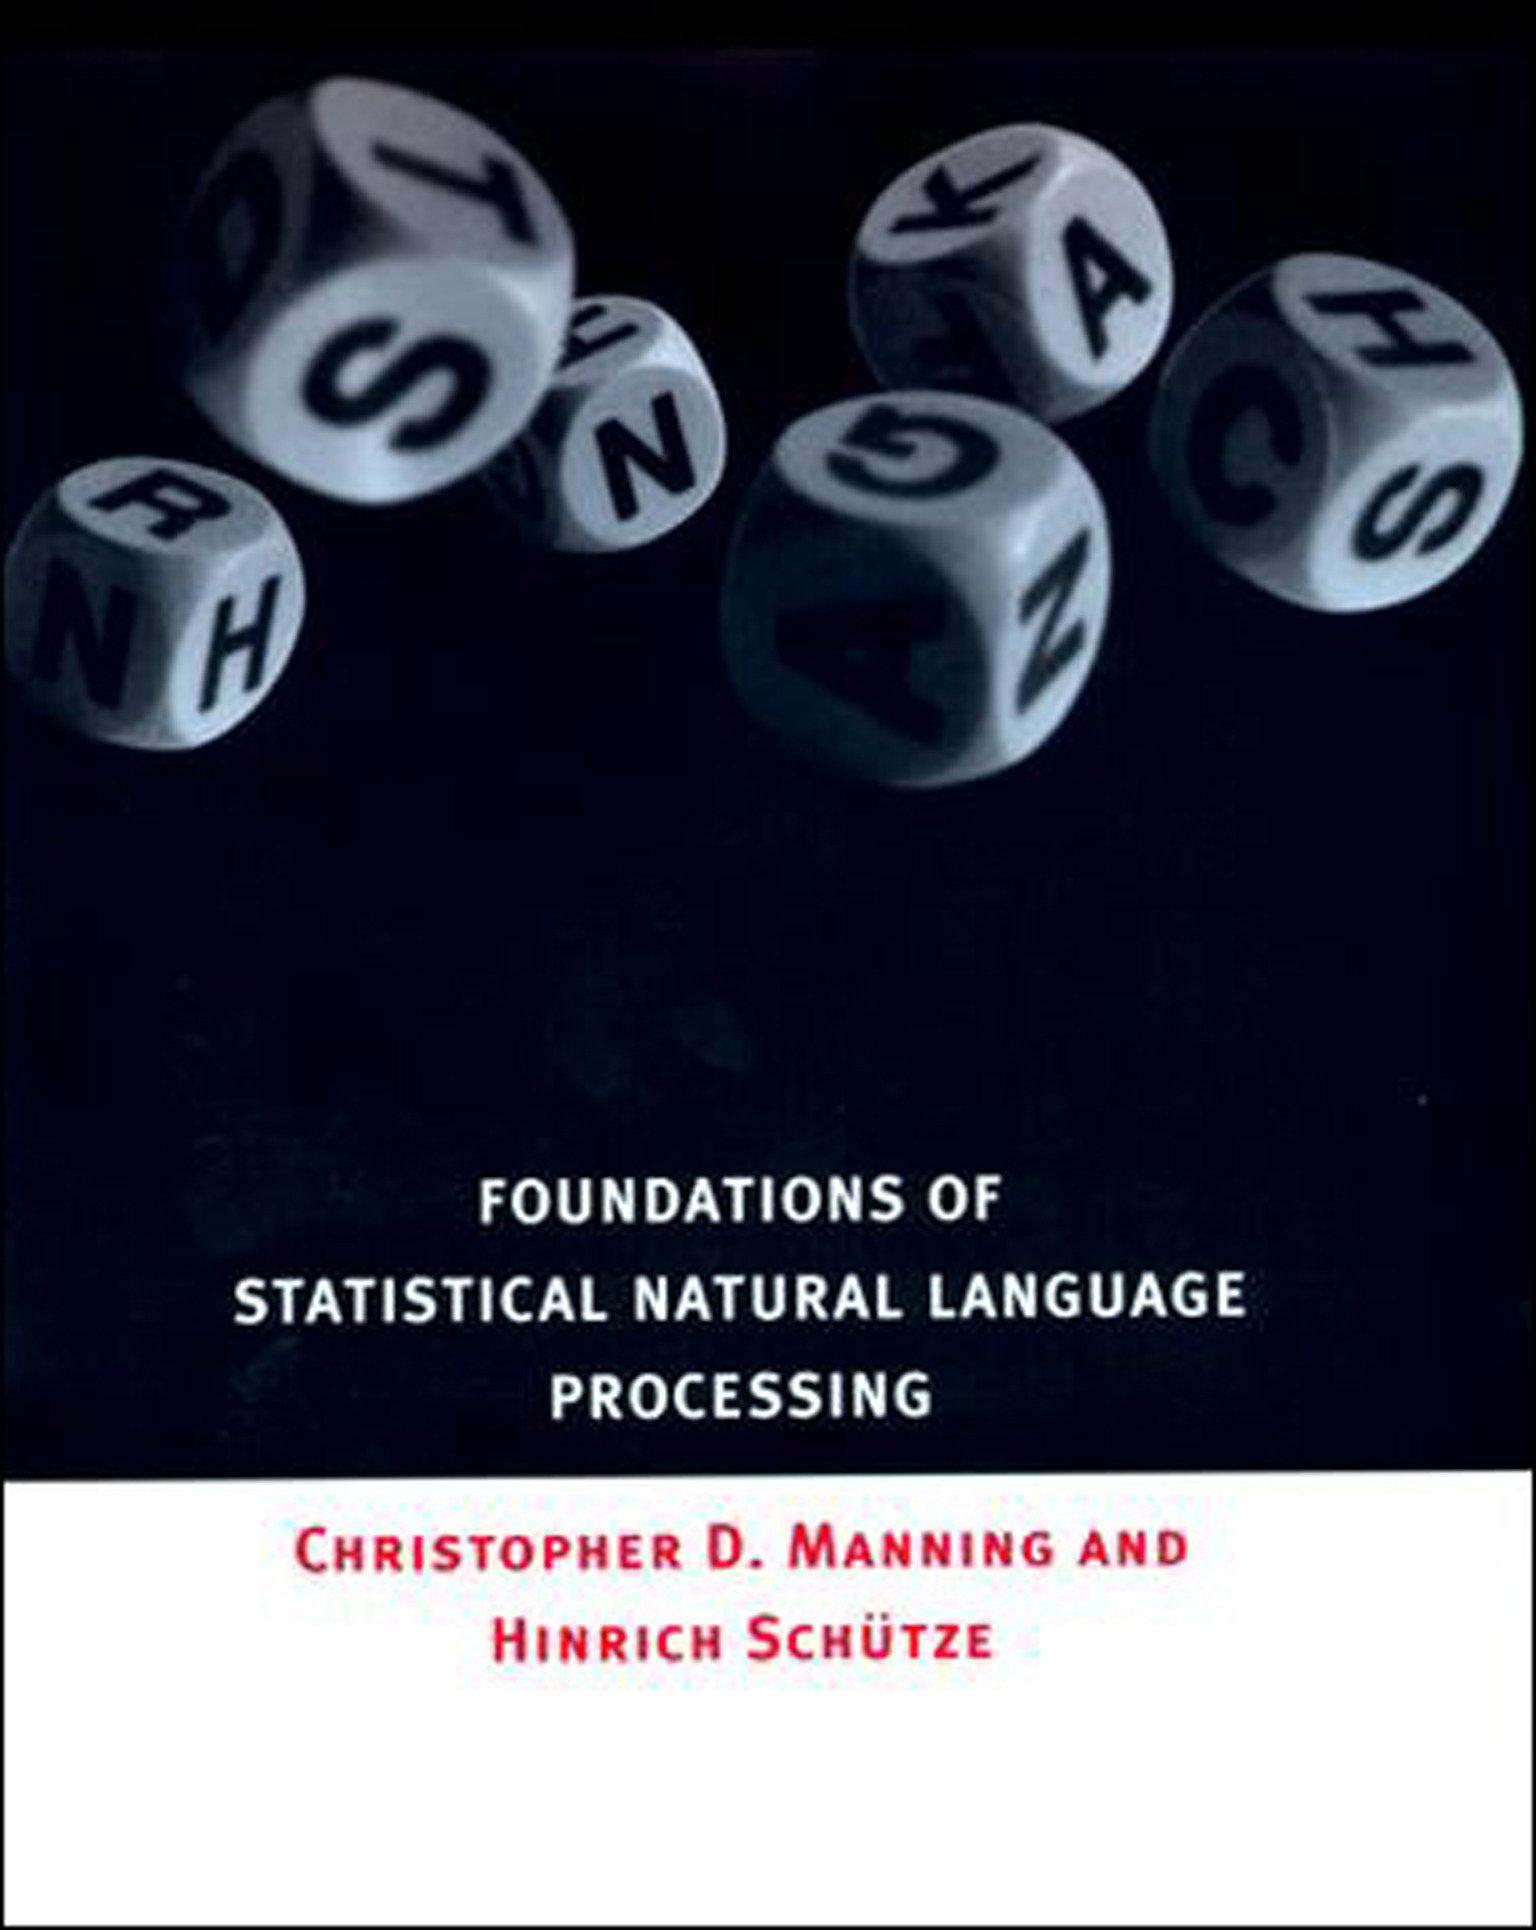 Foundations of Statistical Natural Language Processing / Christopher Manning (u. a.) / Buch / Foundations of Statistical Natural Language Processing / Einband - fest (Hardcover) / Englisch / 1999 - Manning, Christopher (Stanford University)